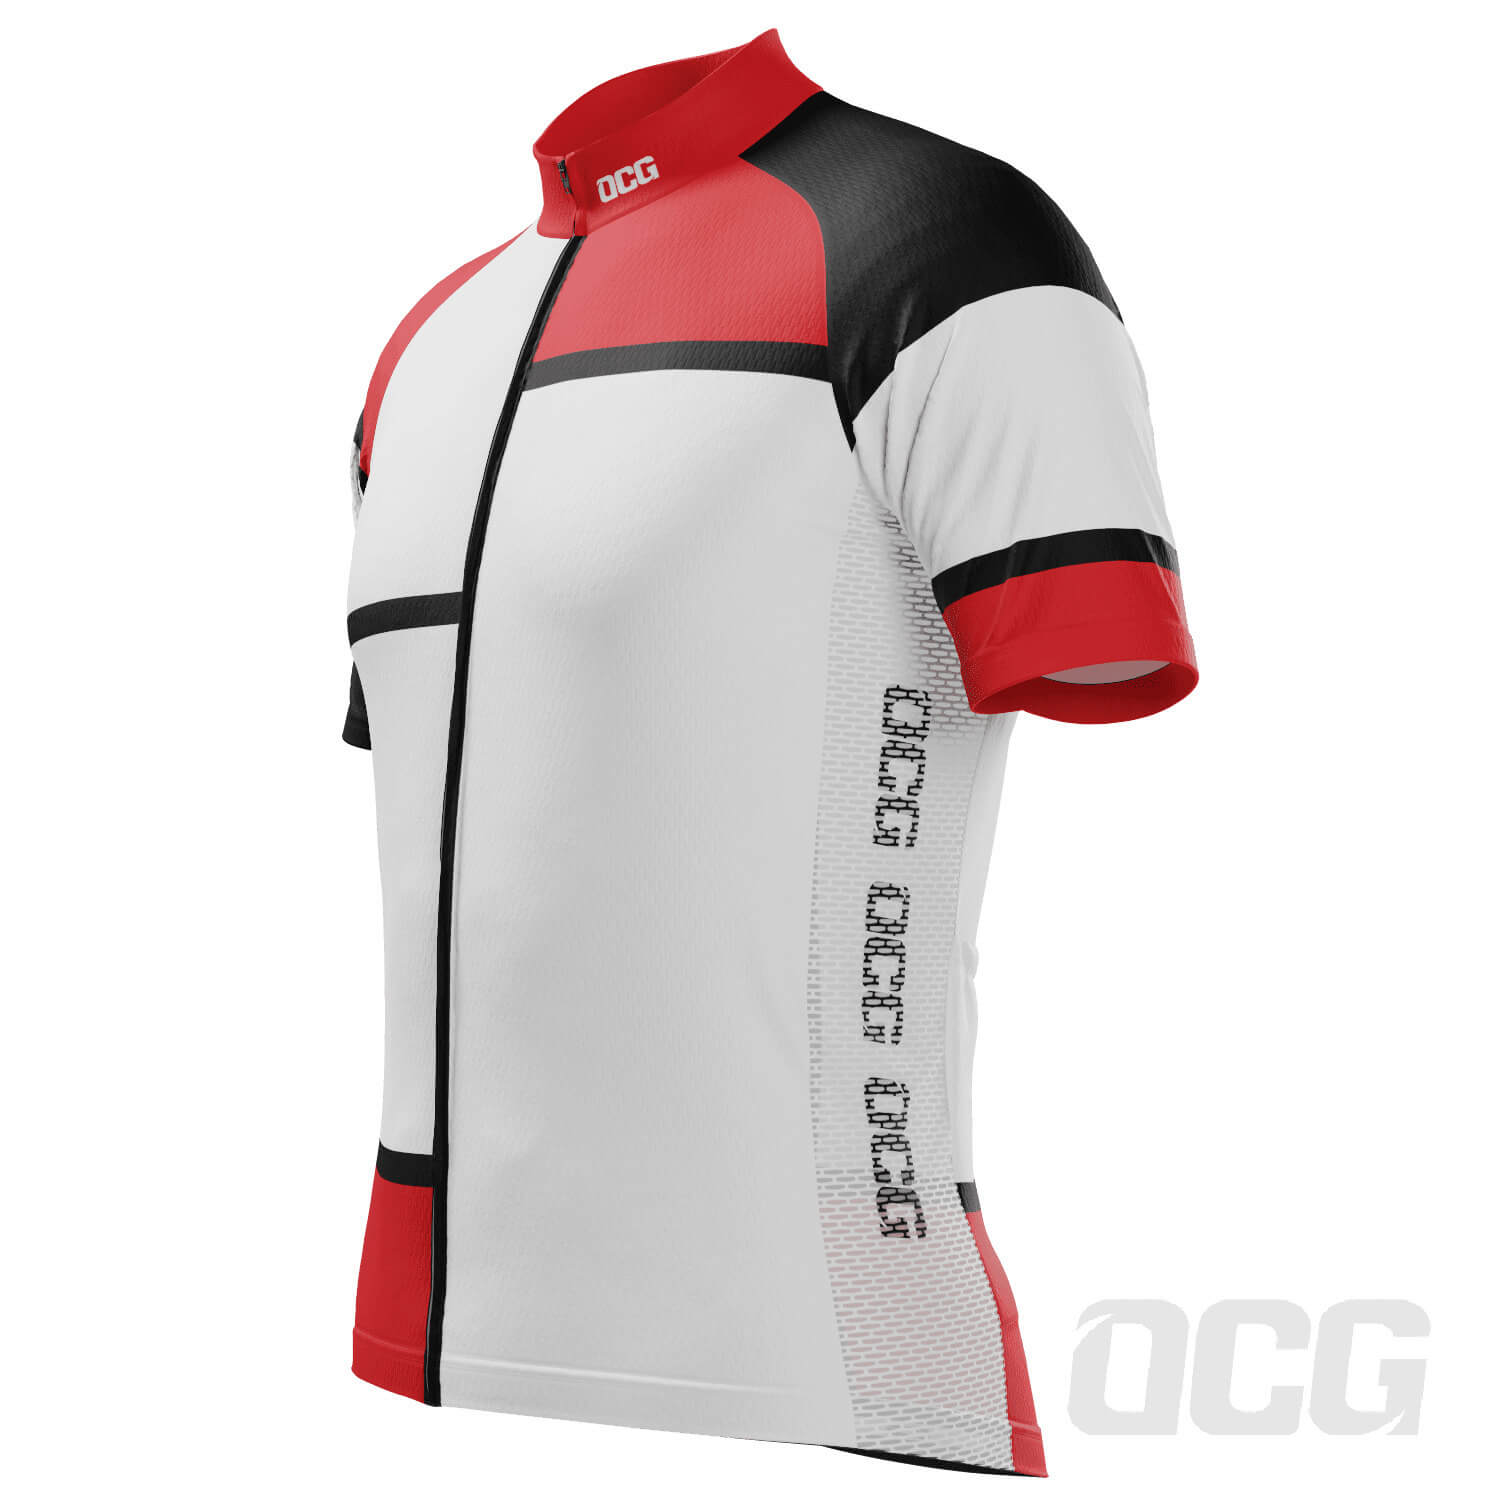 Men's La Vie Claire in Red Short Sleeve Cycling Jersey